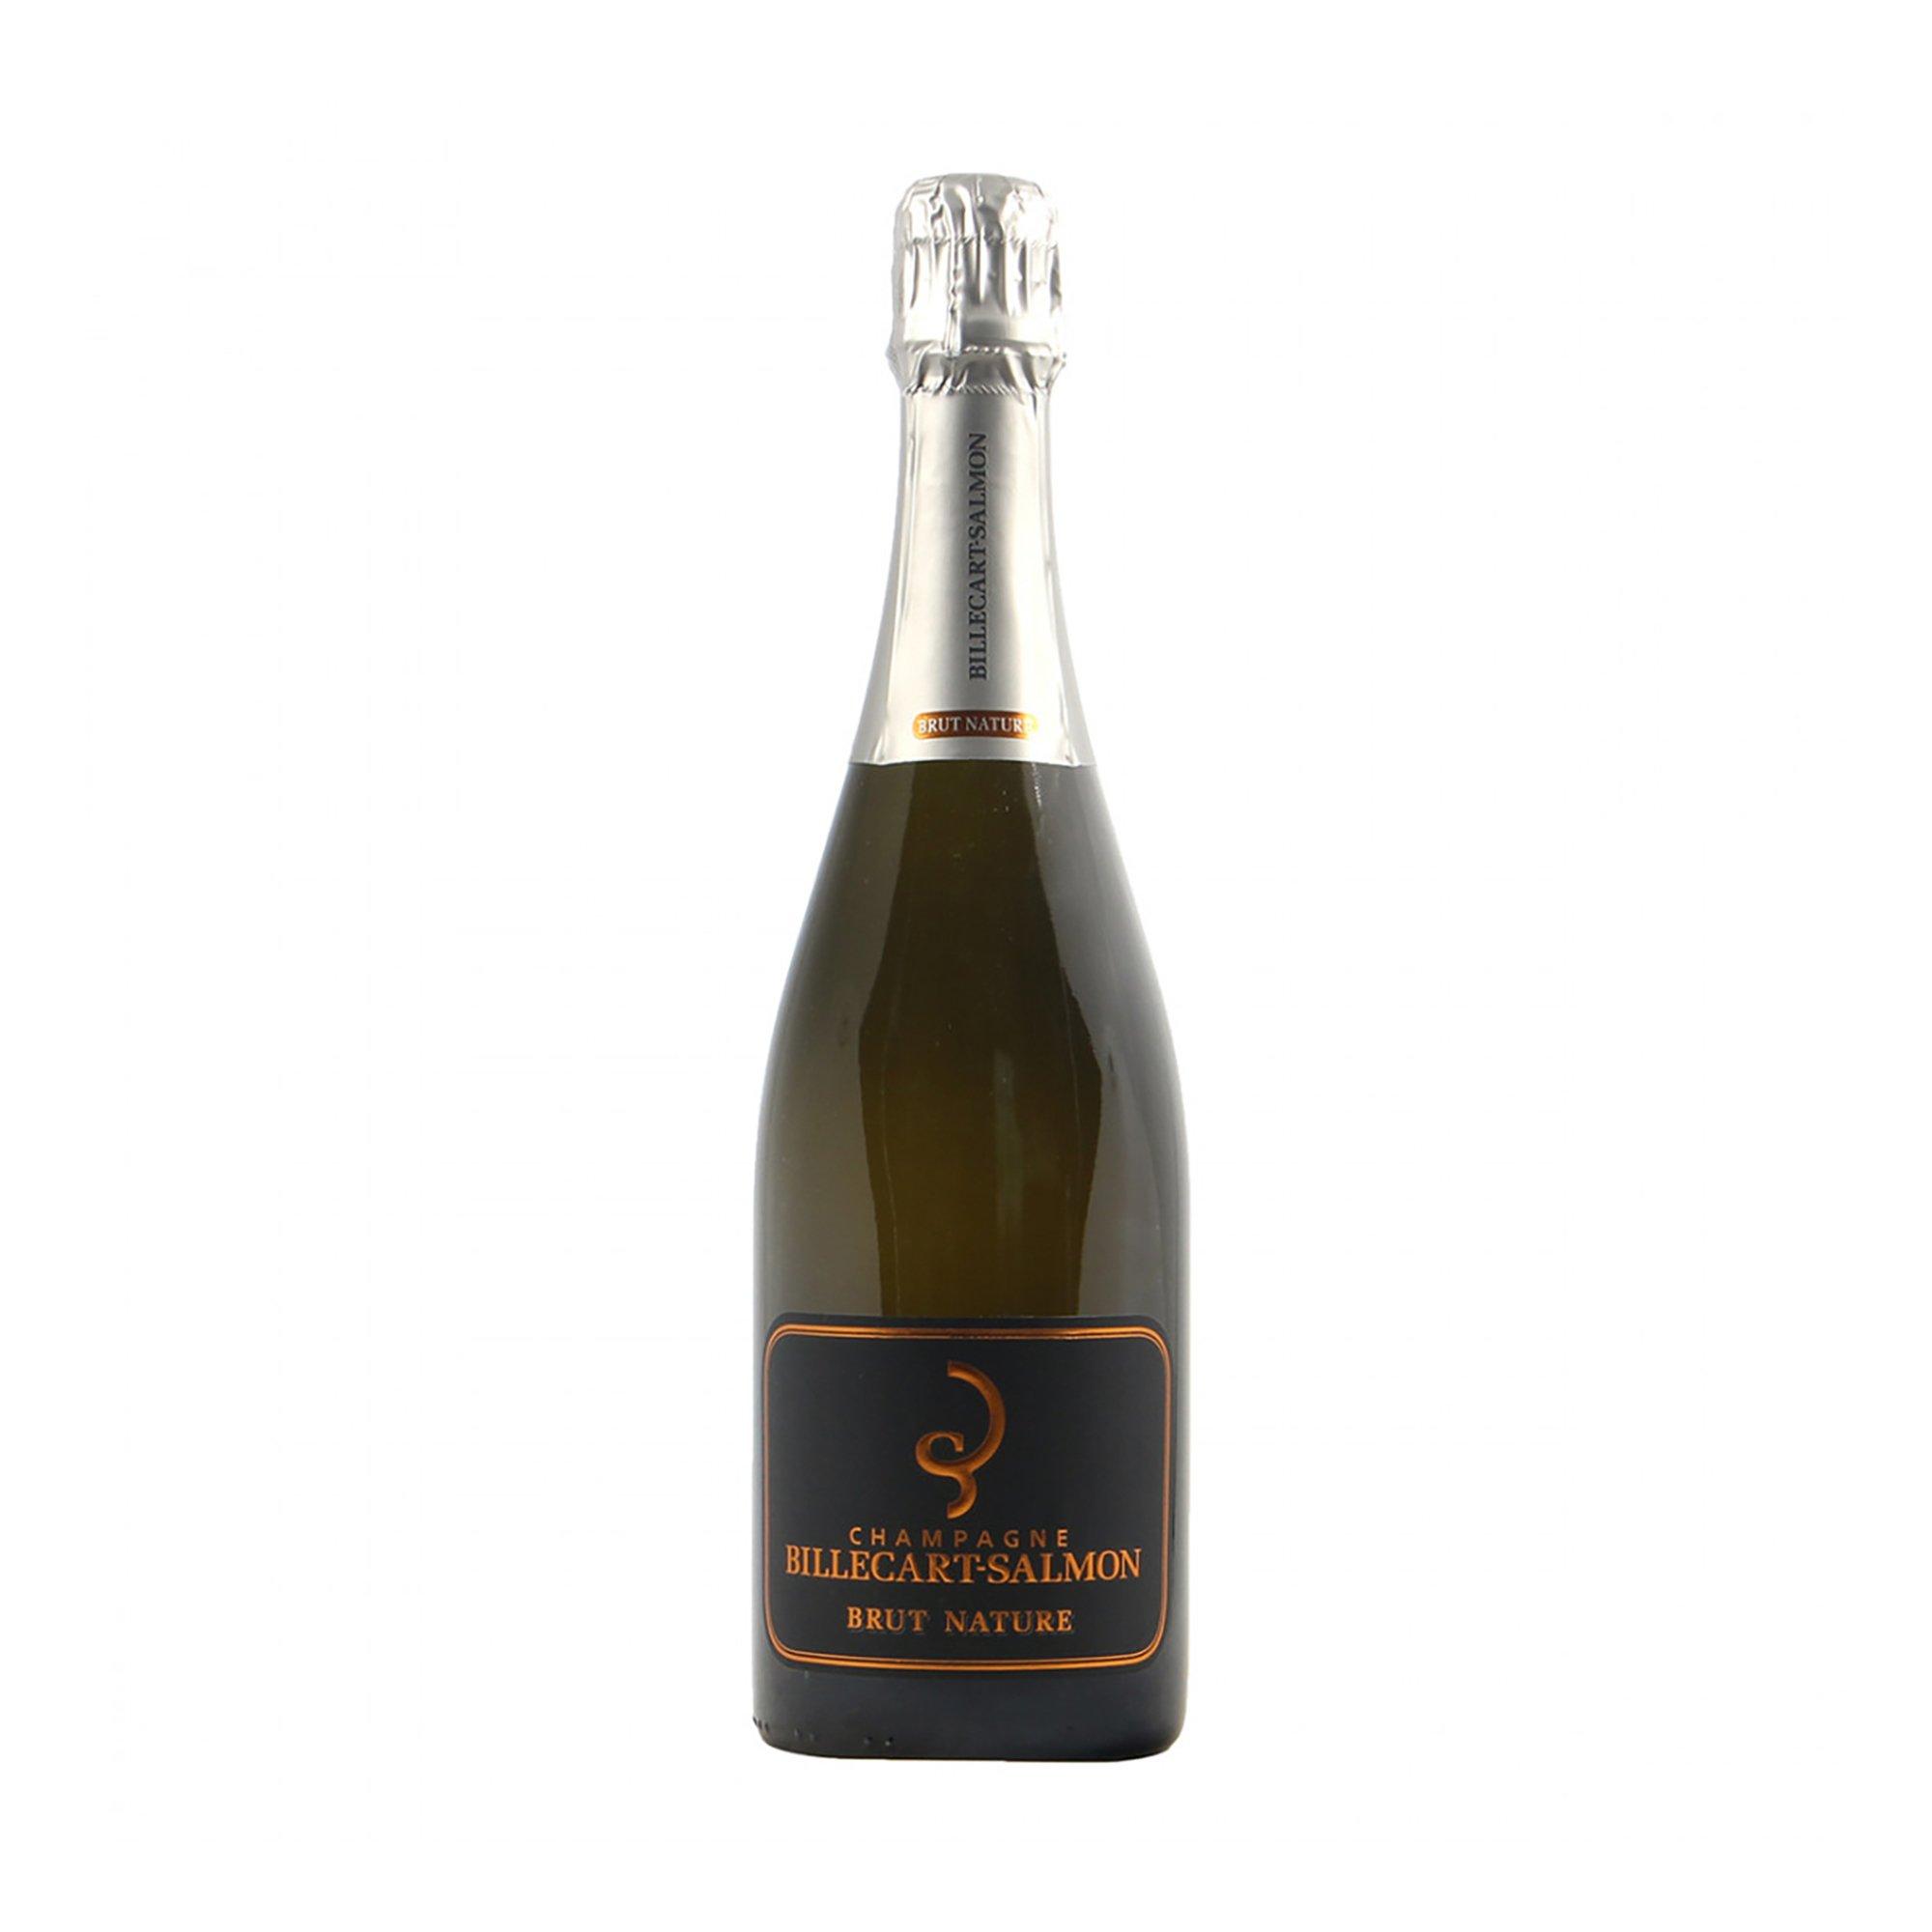 Image of Champagne Billecart-Salmon Brut Nature - 75 cl